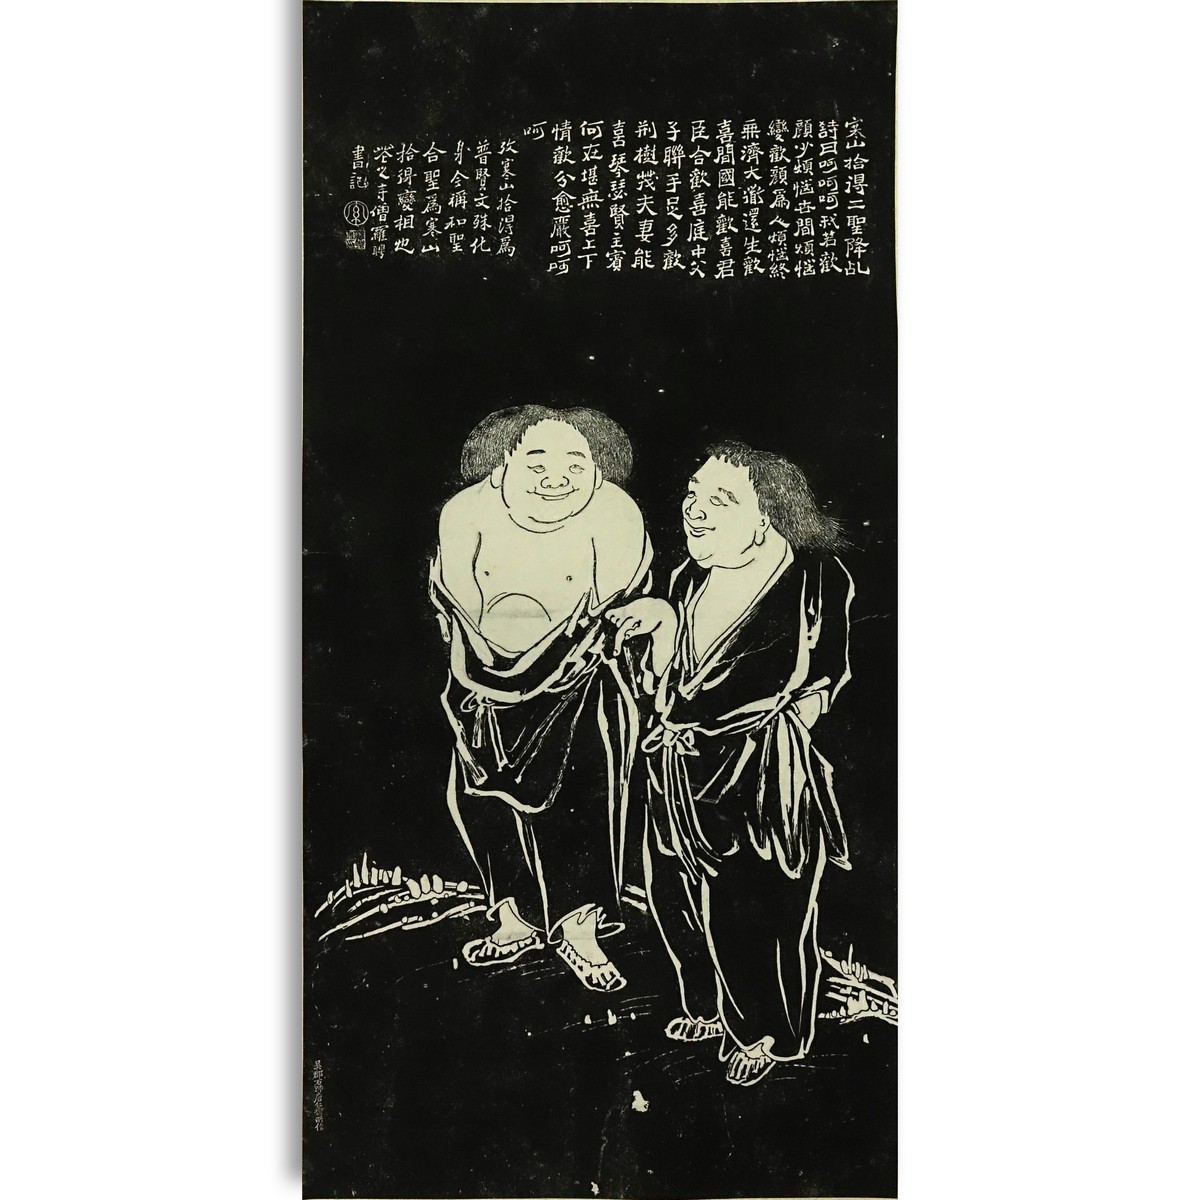 Chinese Scroll Painting of a Stone Rubbing, Monks Hanshan and Shide,  Calligraphy Panel of a Poem Above. Signed on obverse side of the scroll and box.